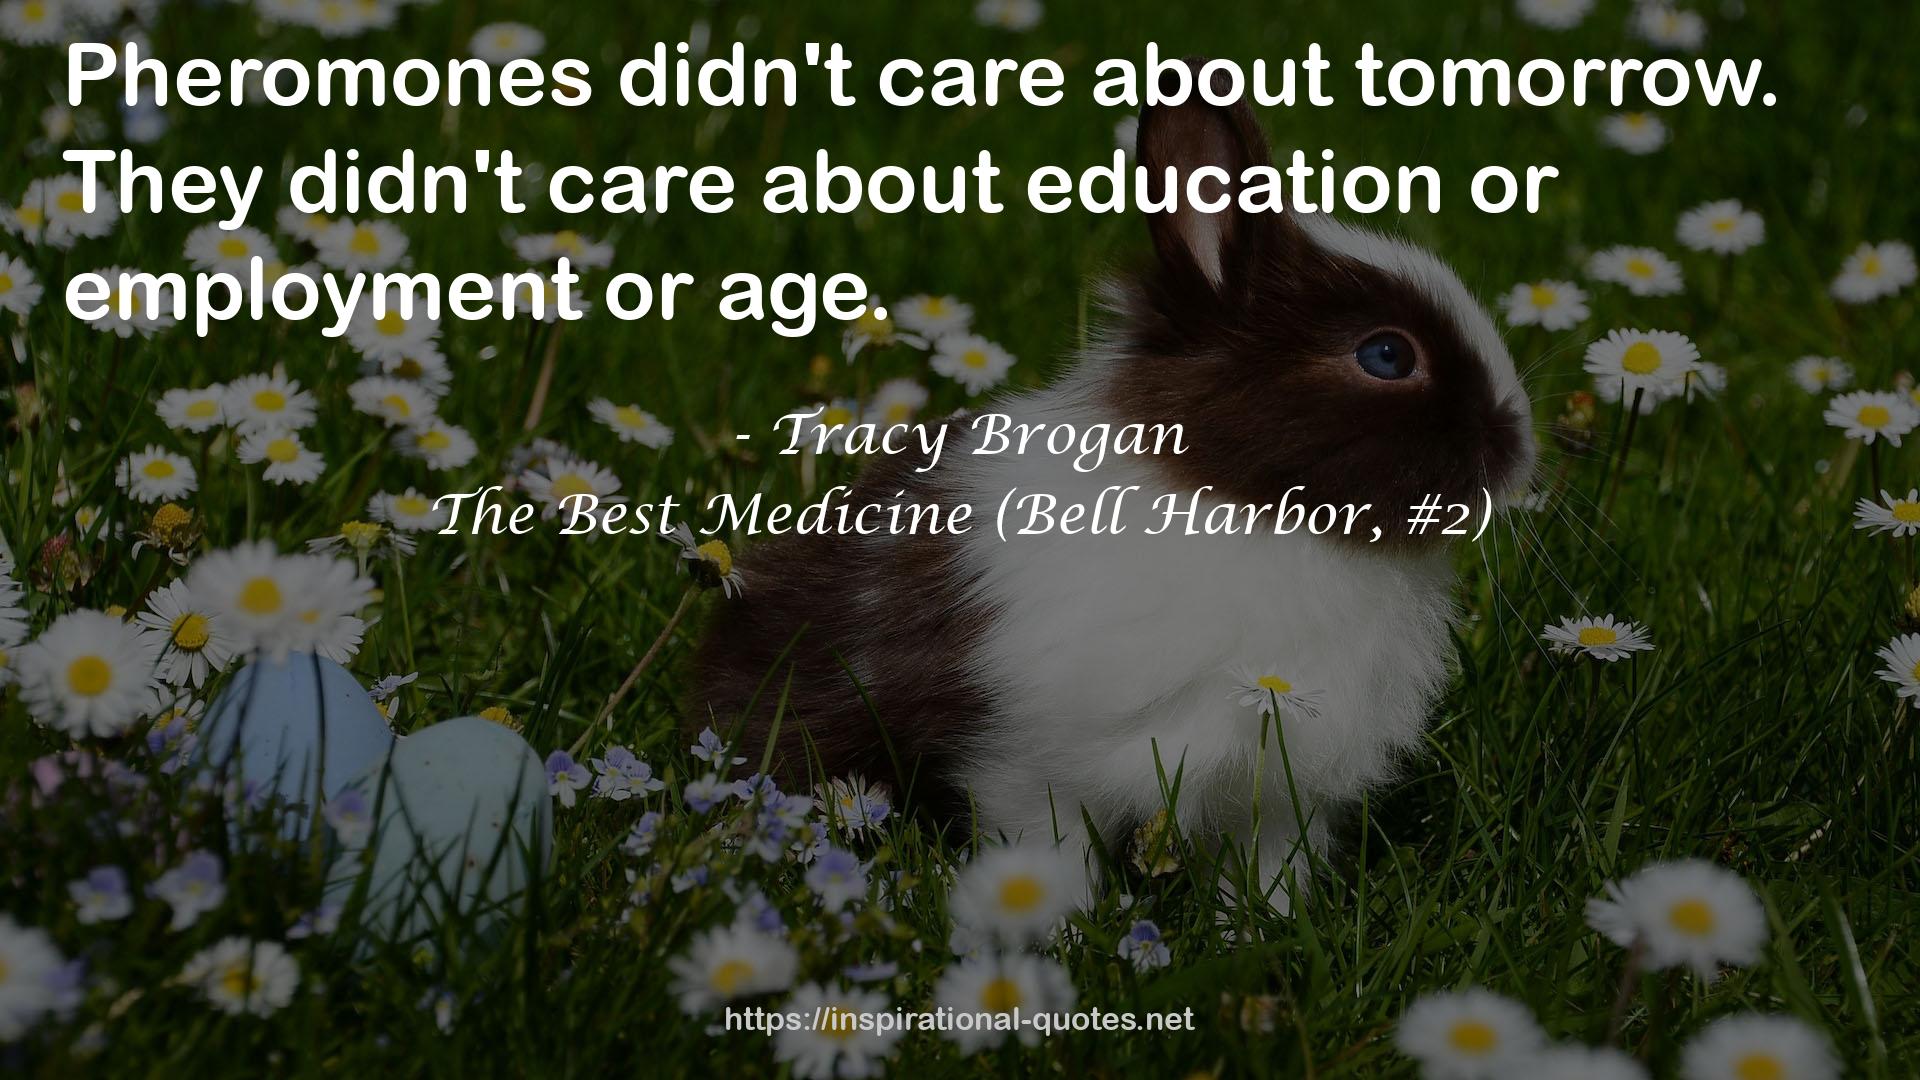 The Best Medicine (Bell Harbor, #2) QUOTES